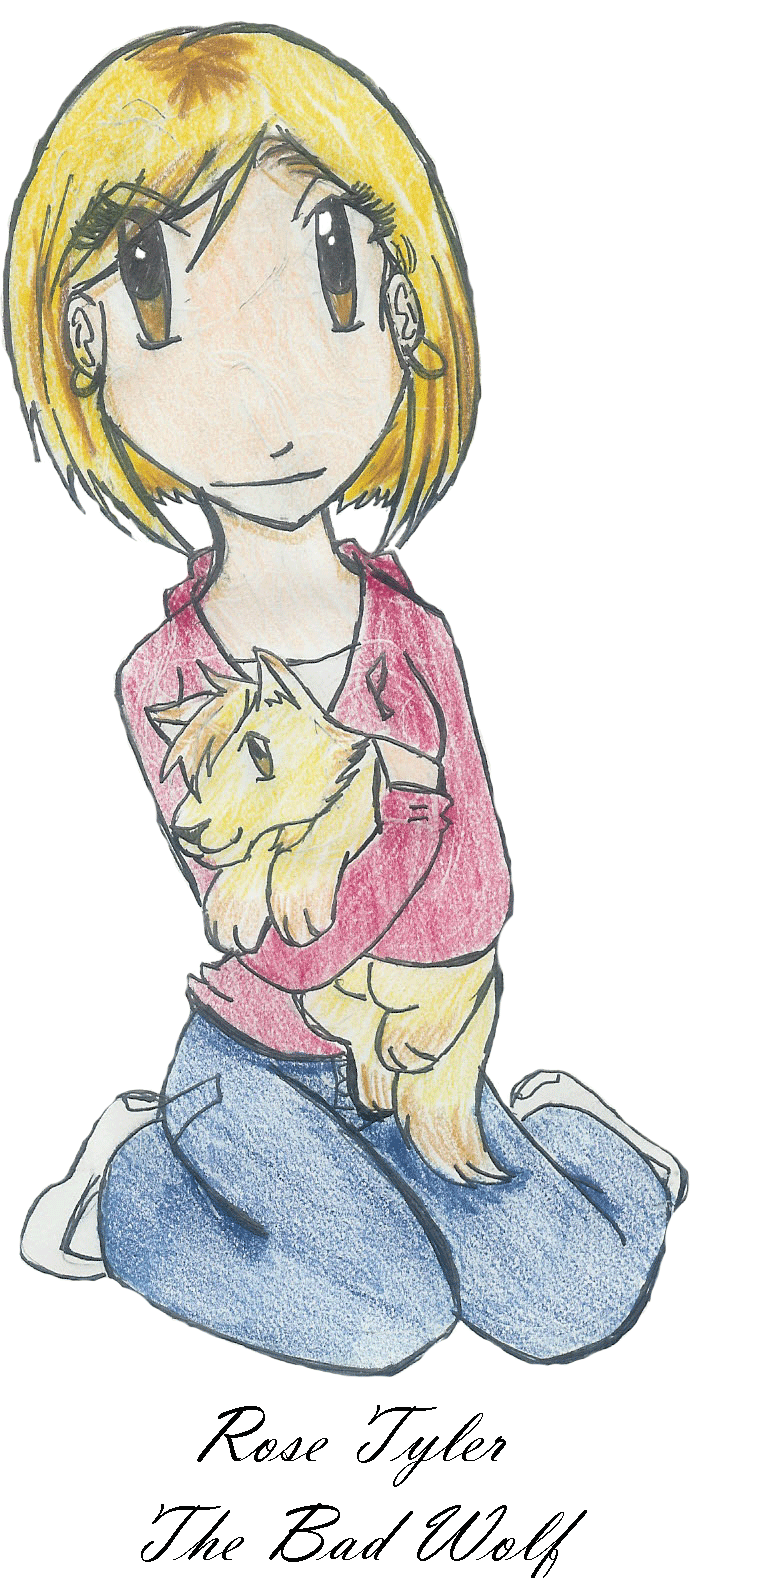 Rose Tyler and Wolf Cub by Jaselin